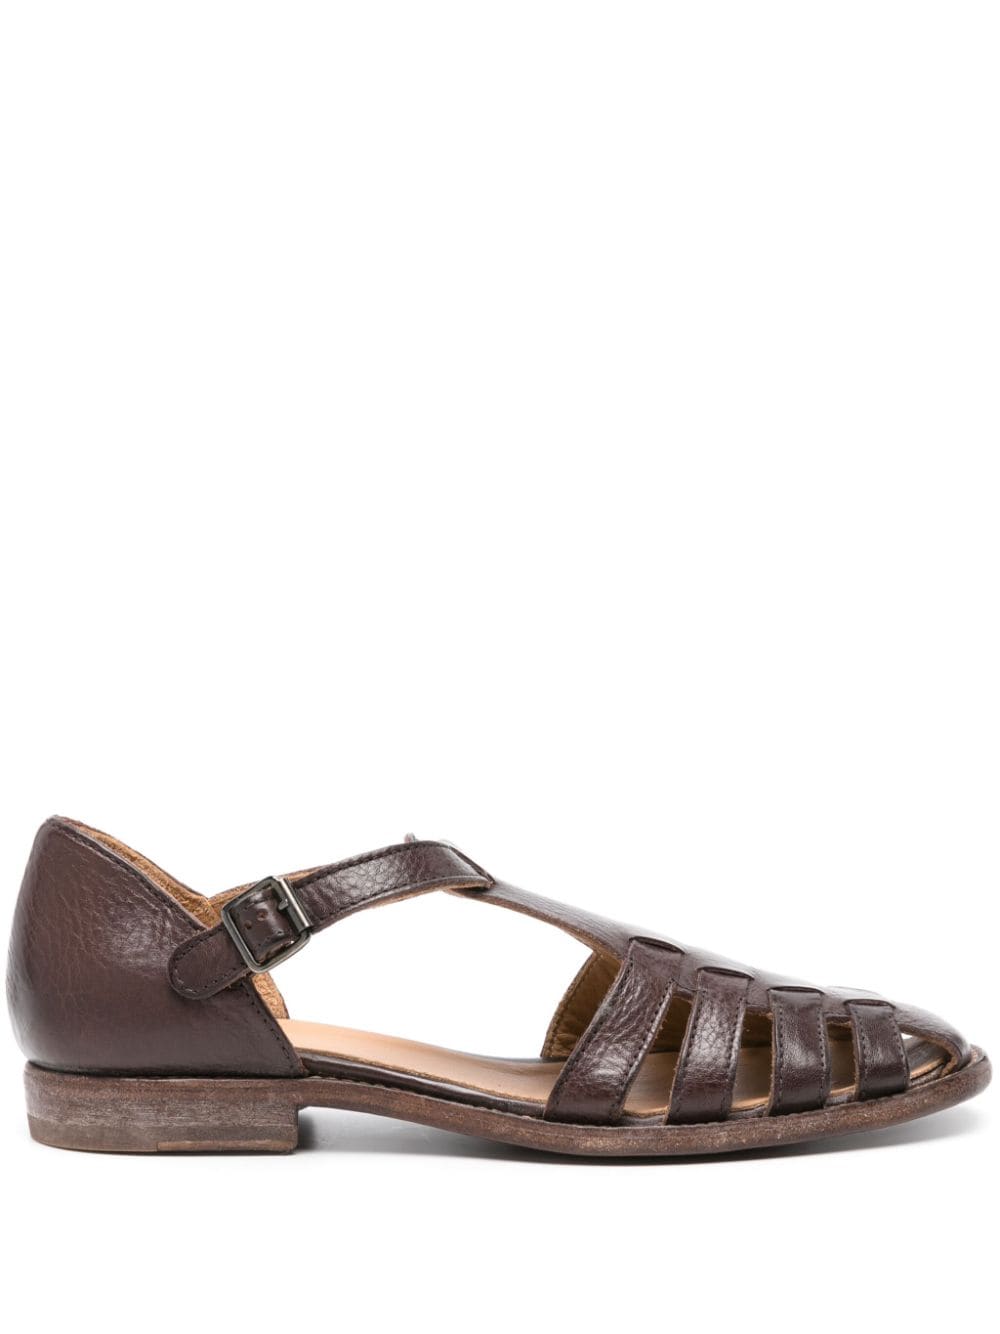 Moma caged leather sandals - Brown von Moma